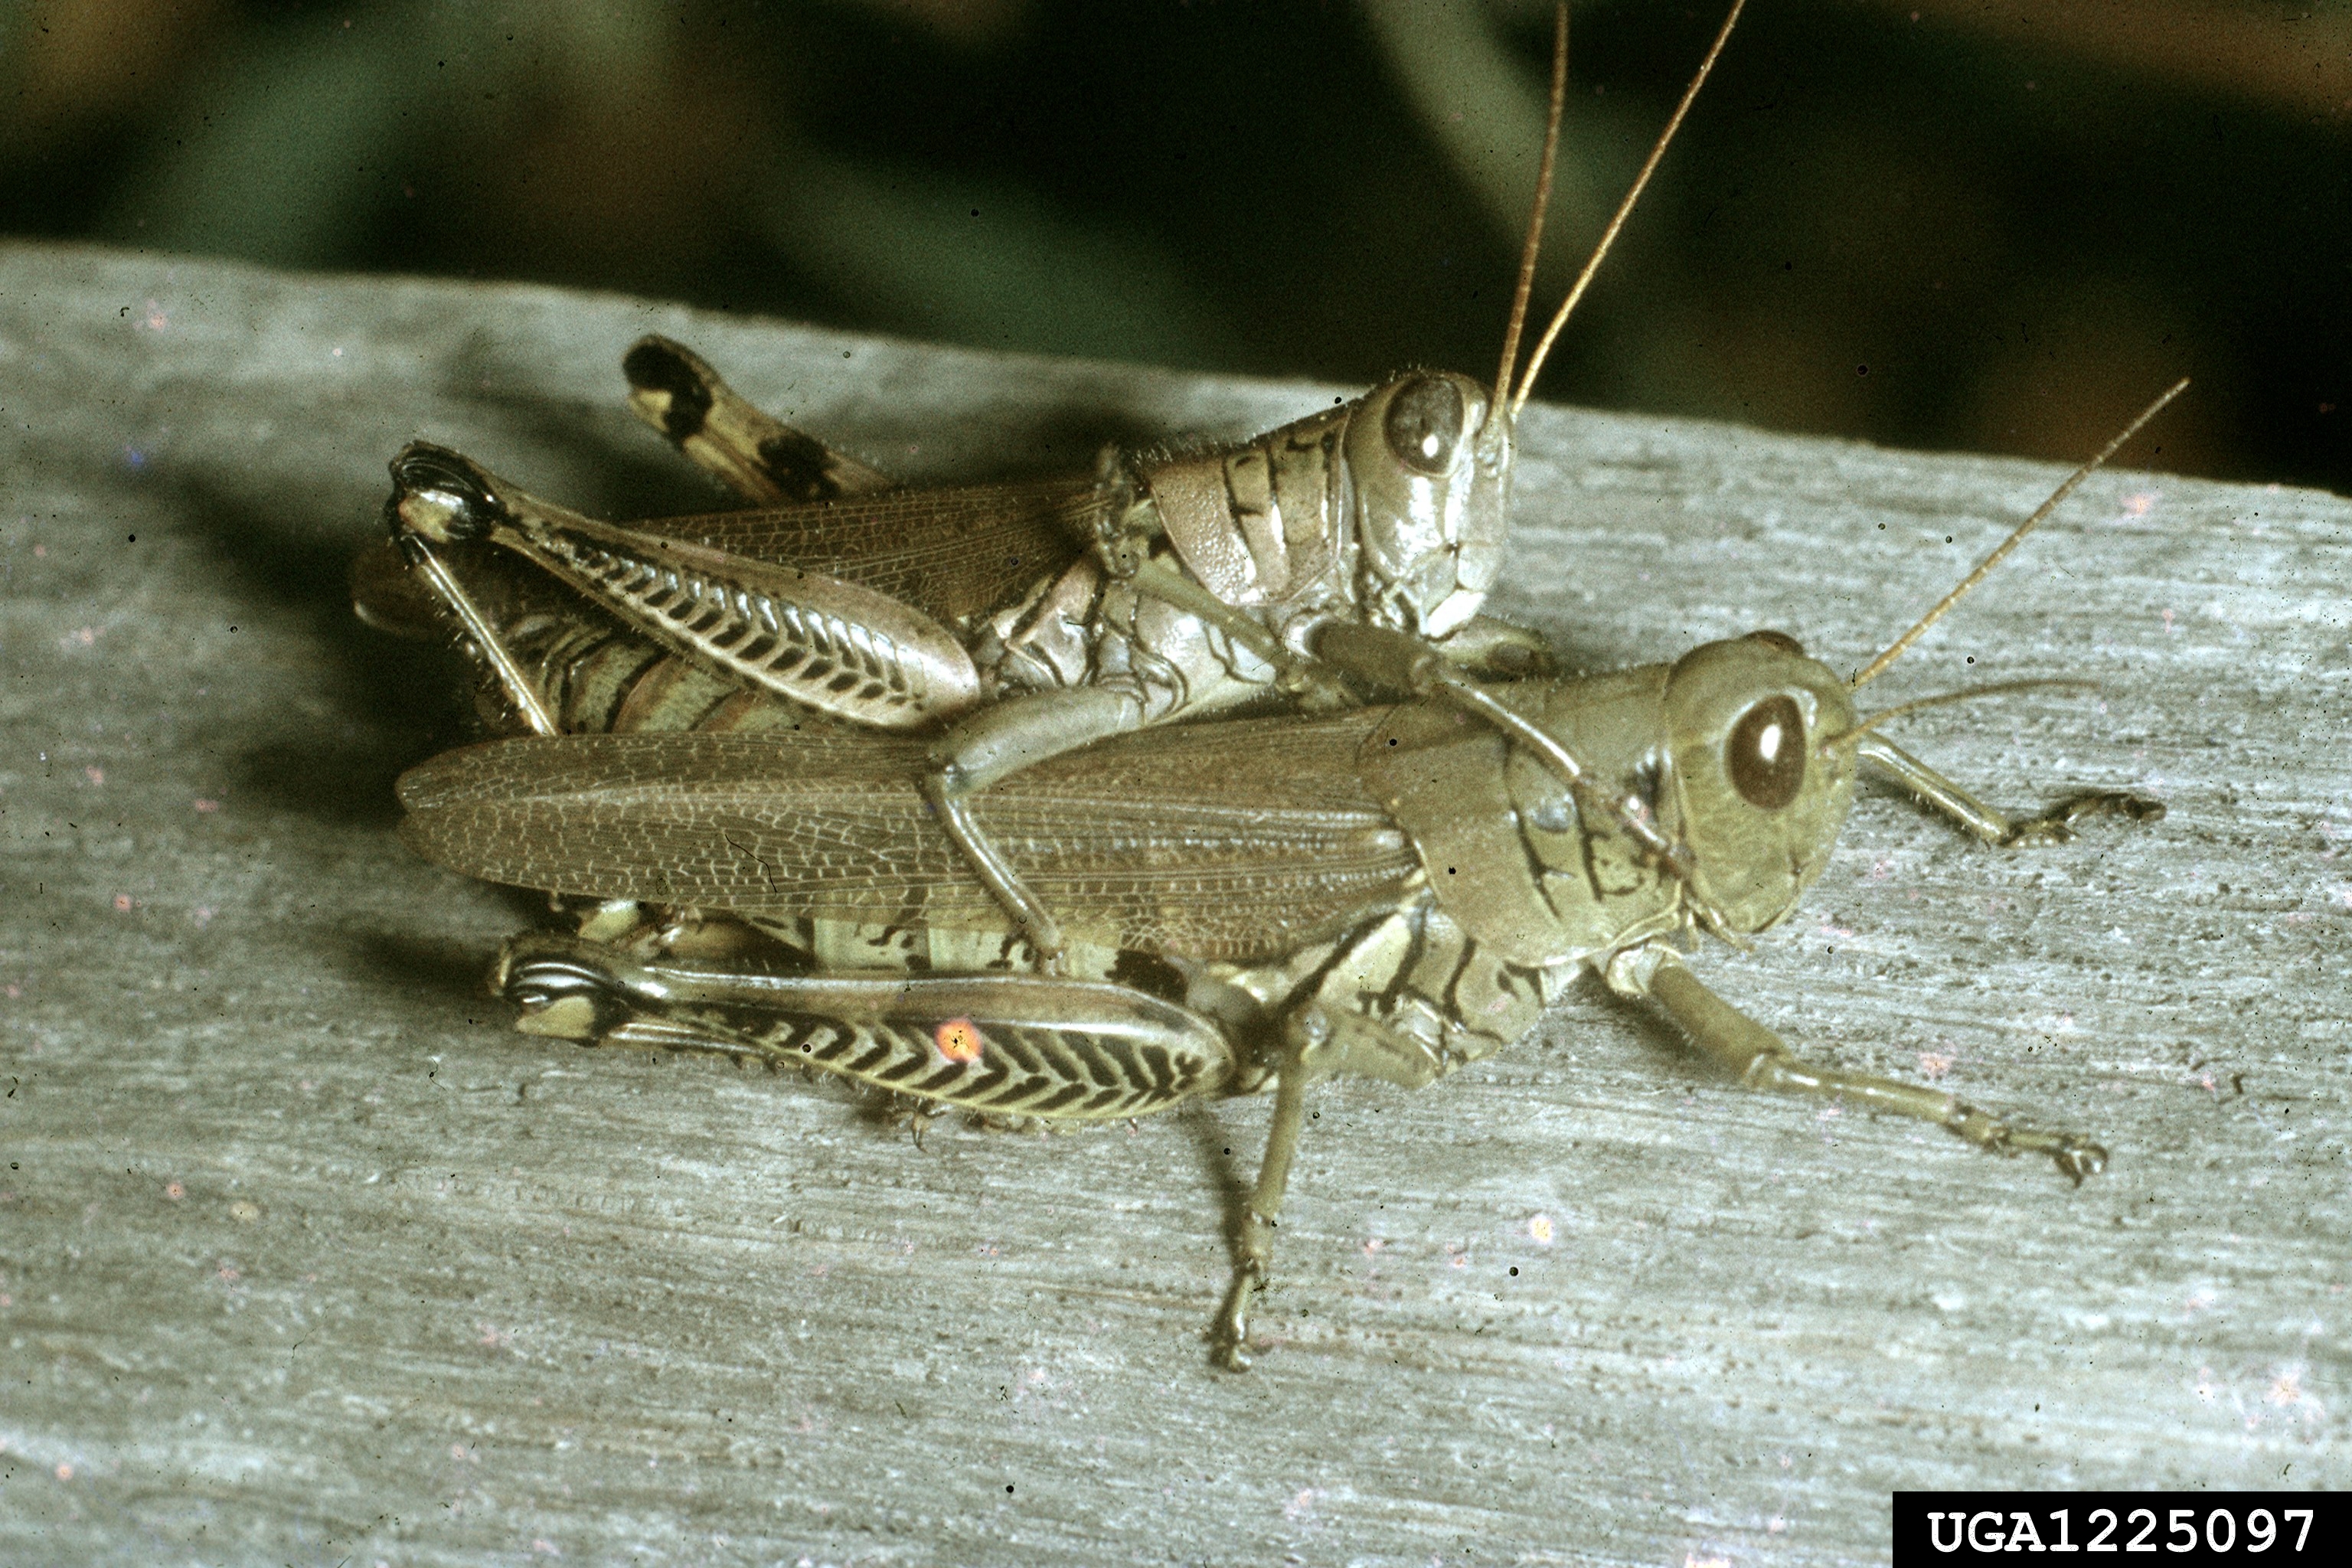 Differential grasshoppers